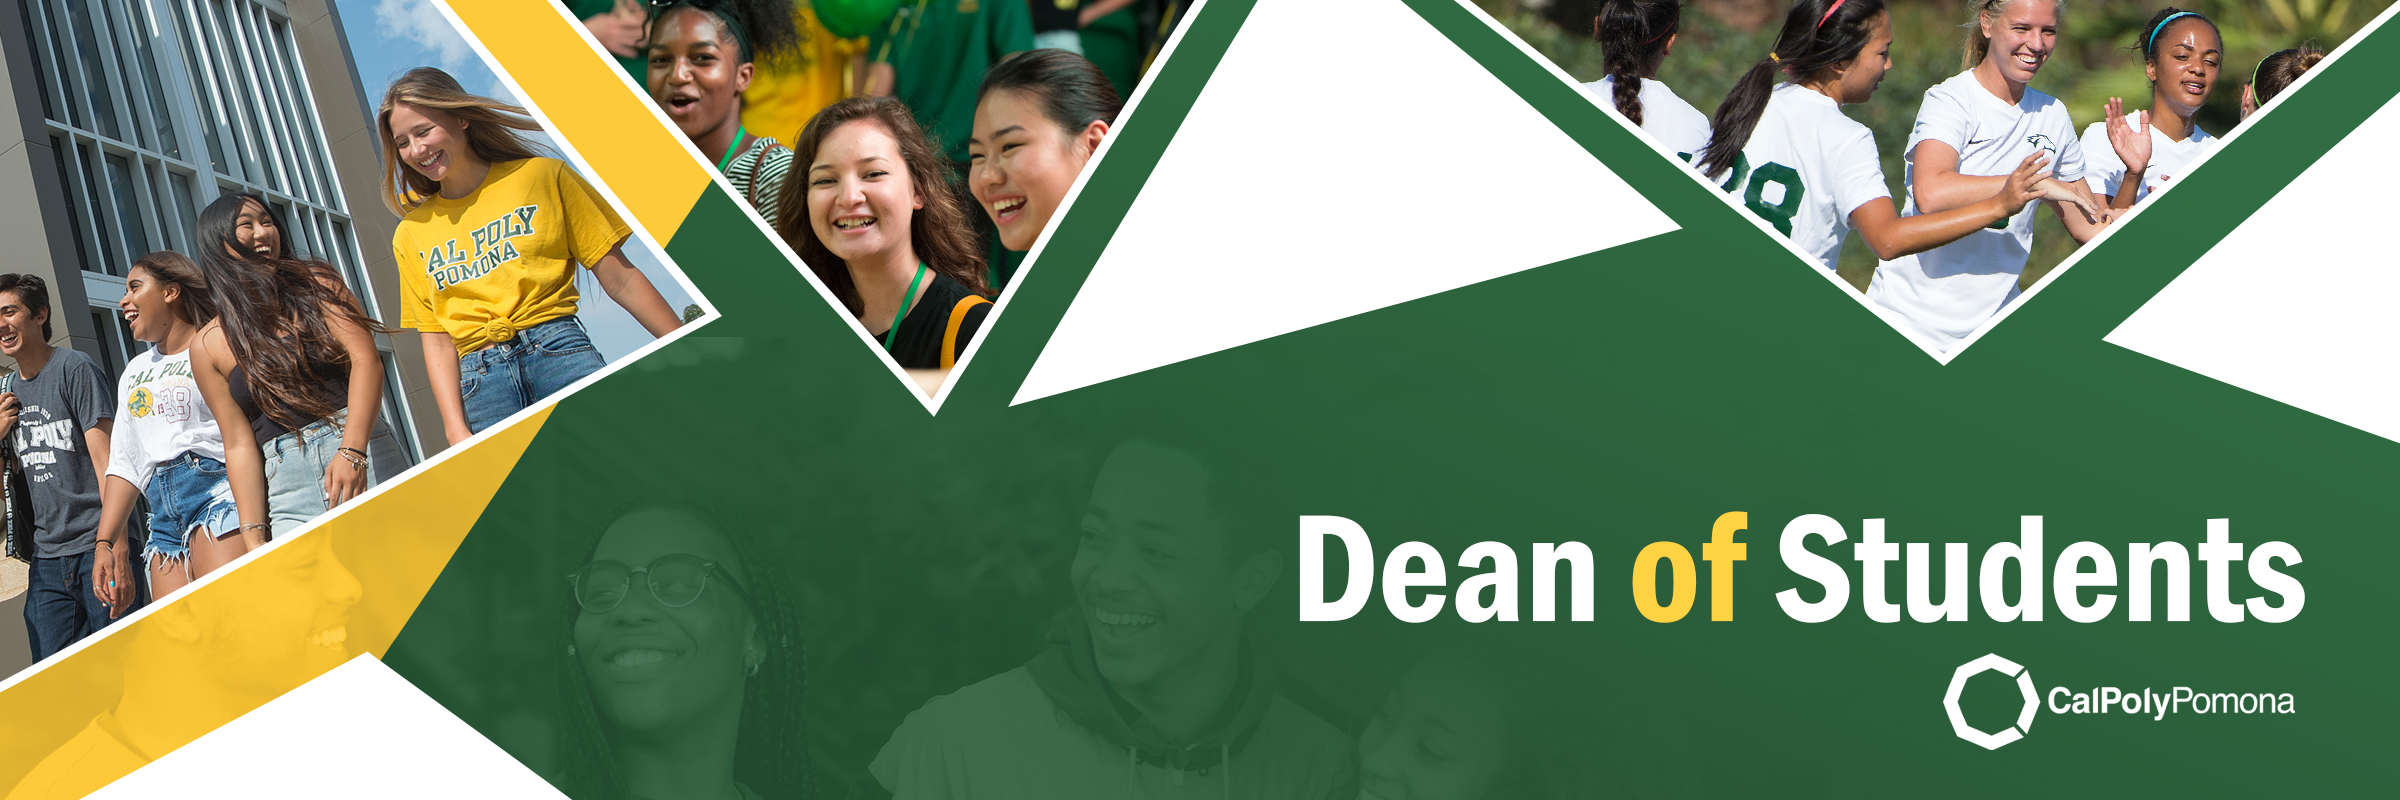 Dean of Students main banner